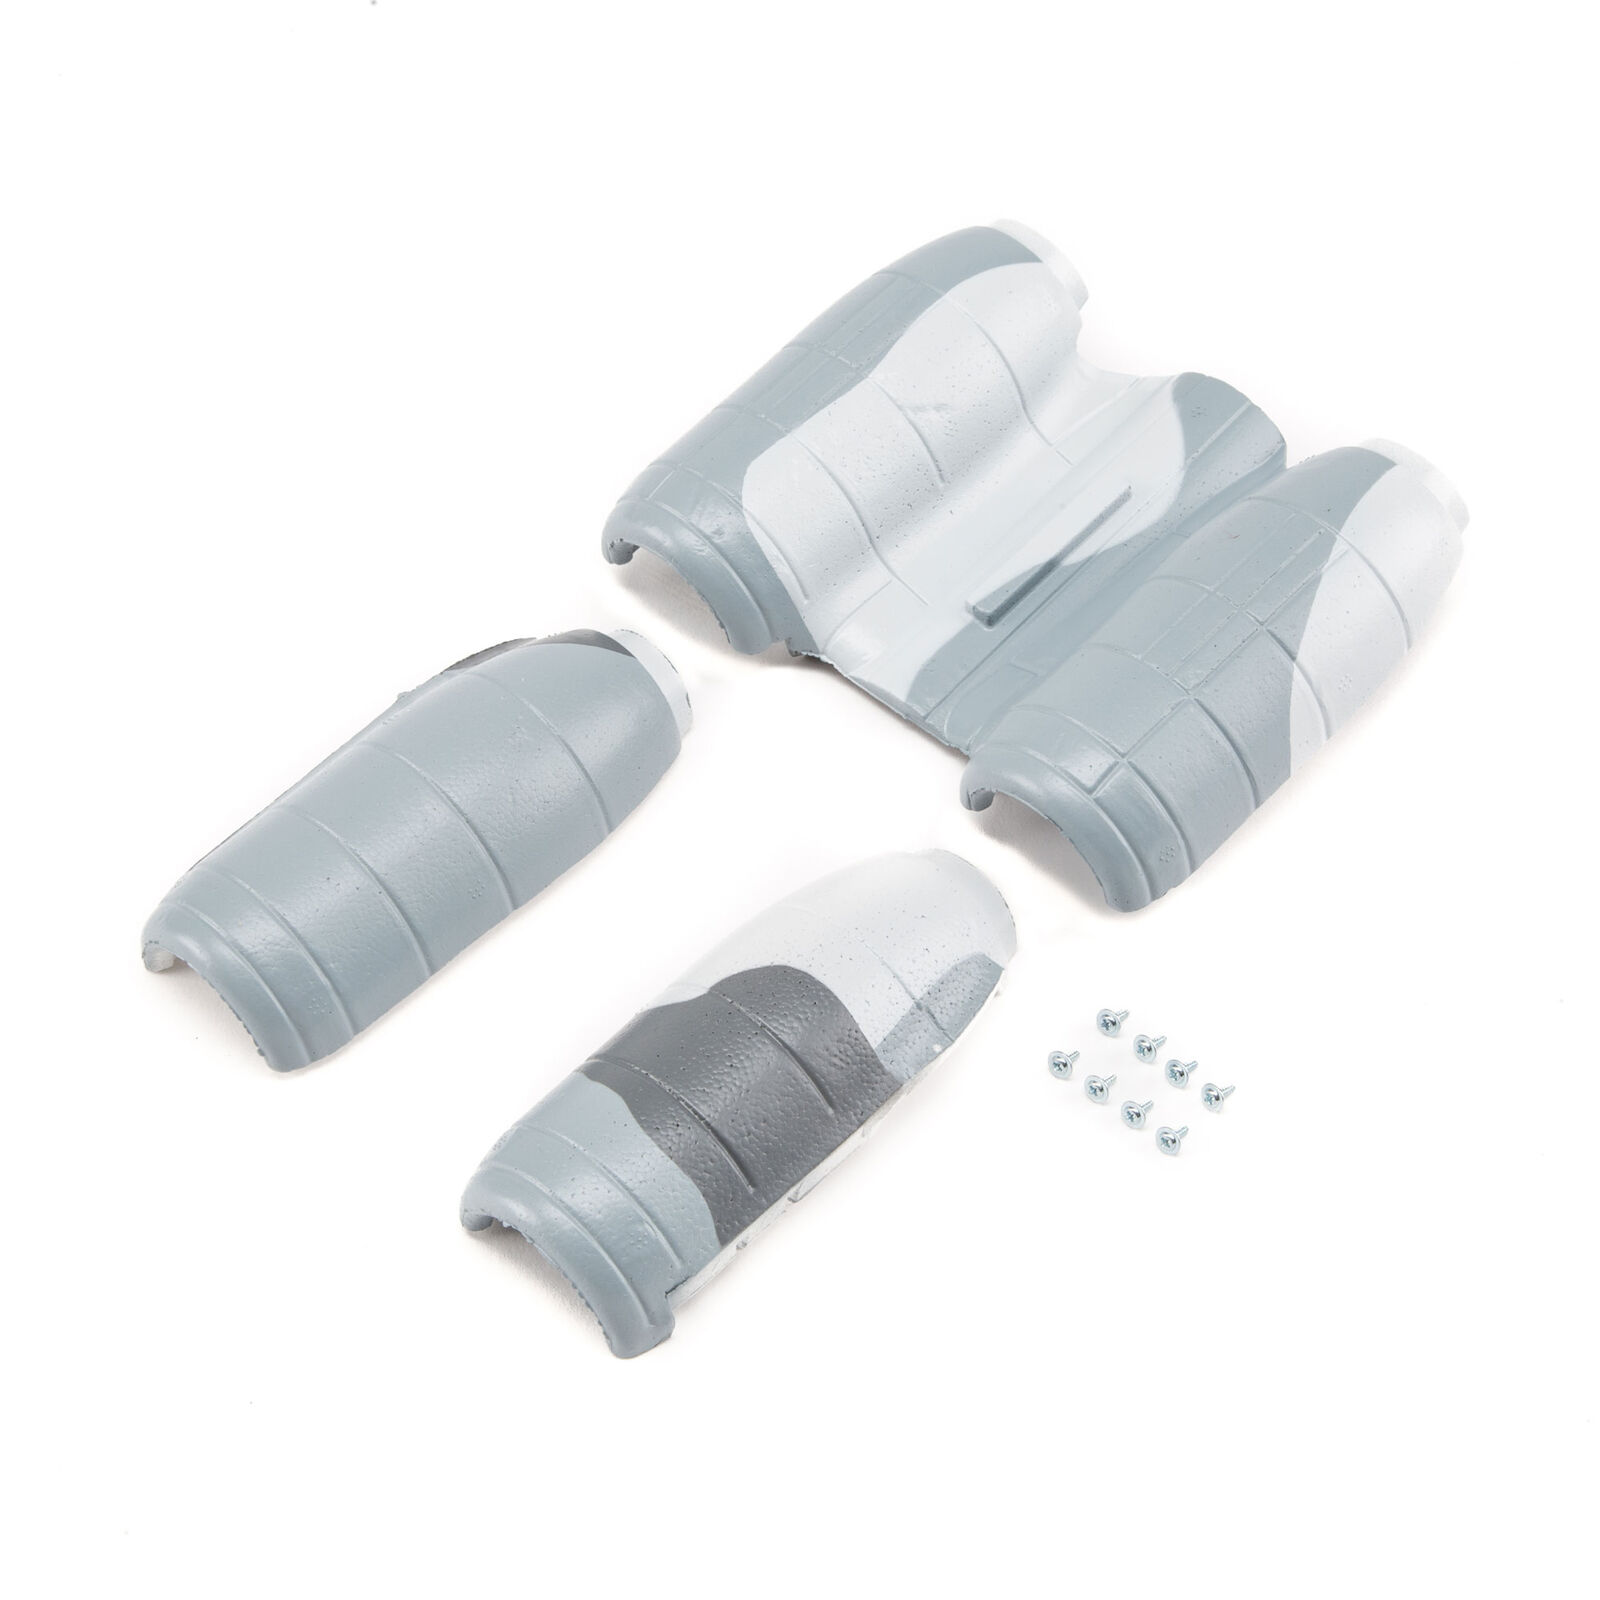 Engine Nacelle Set with accesories: UMX A-10 BL